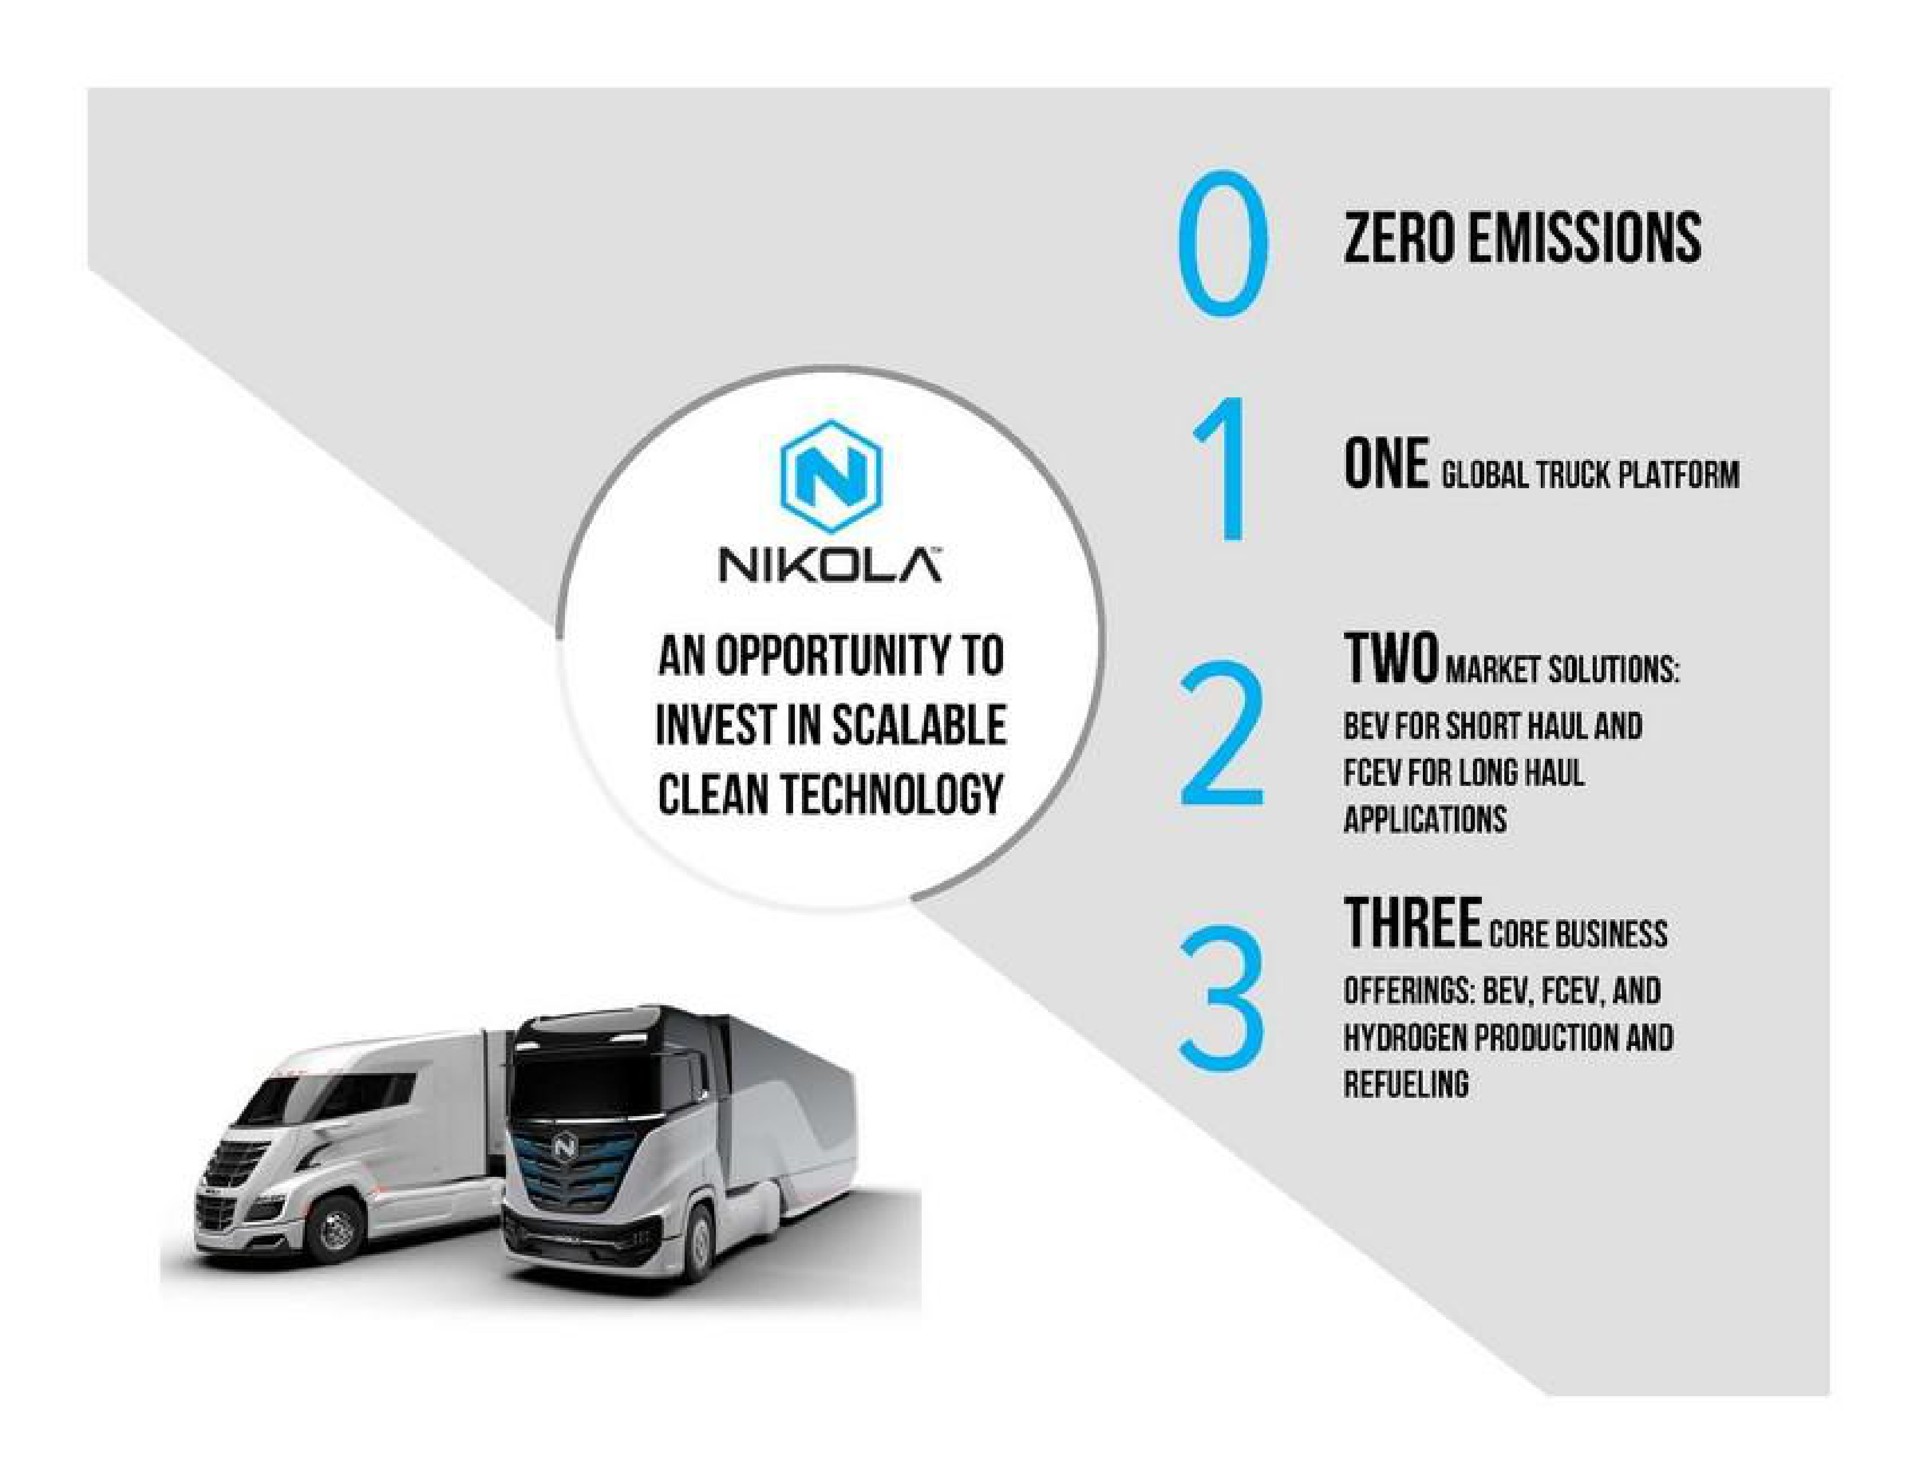 an opportunity to invest in scalable clean technology a zero emissions three cone offerings and hydrogen production and refueling | Nikola